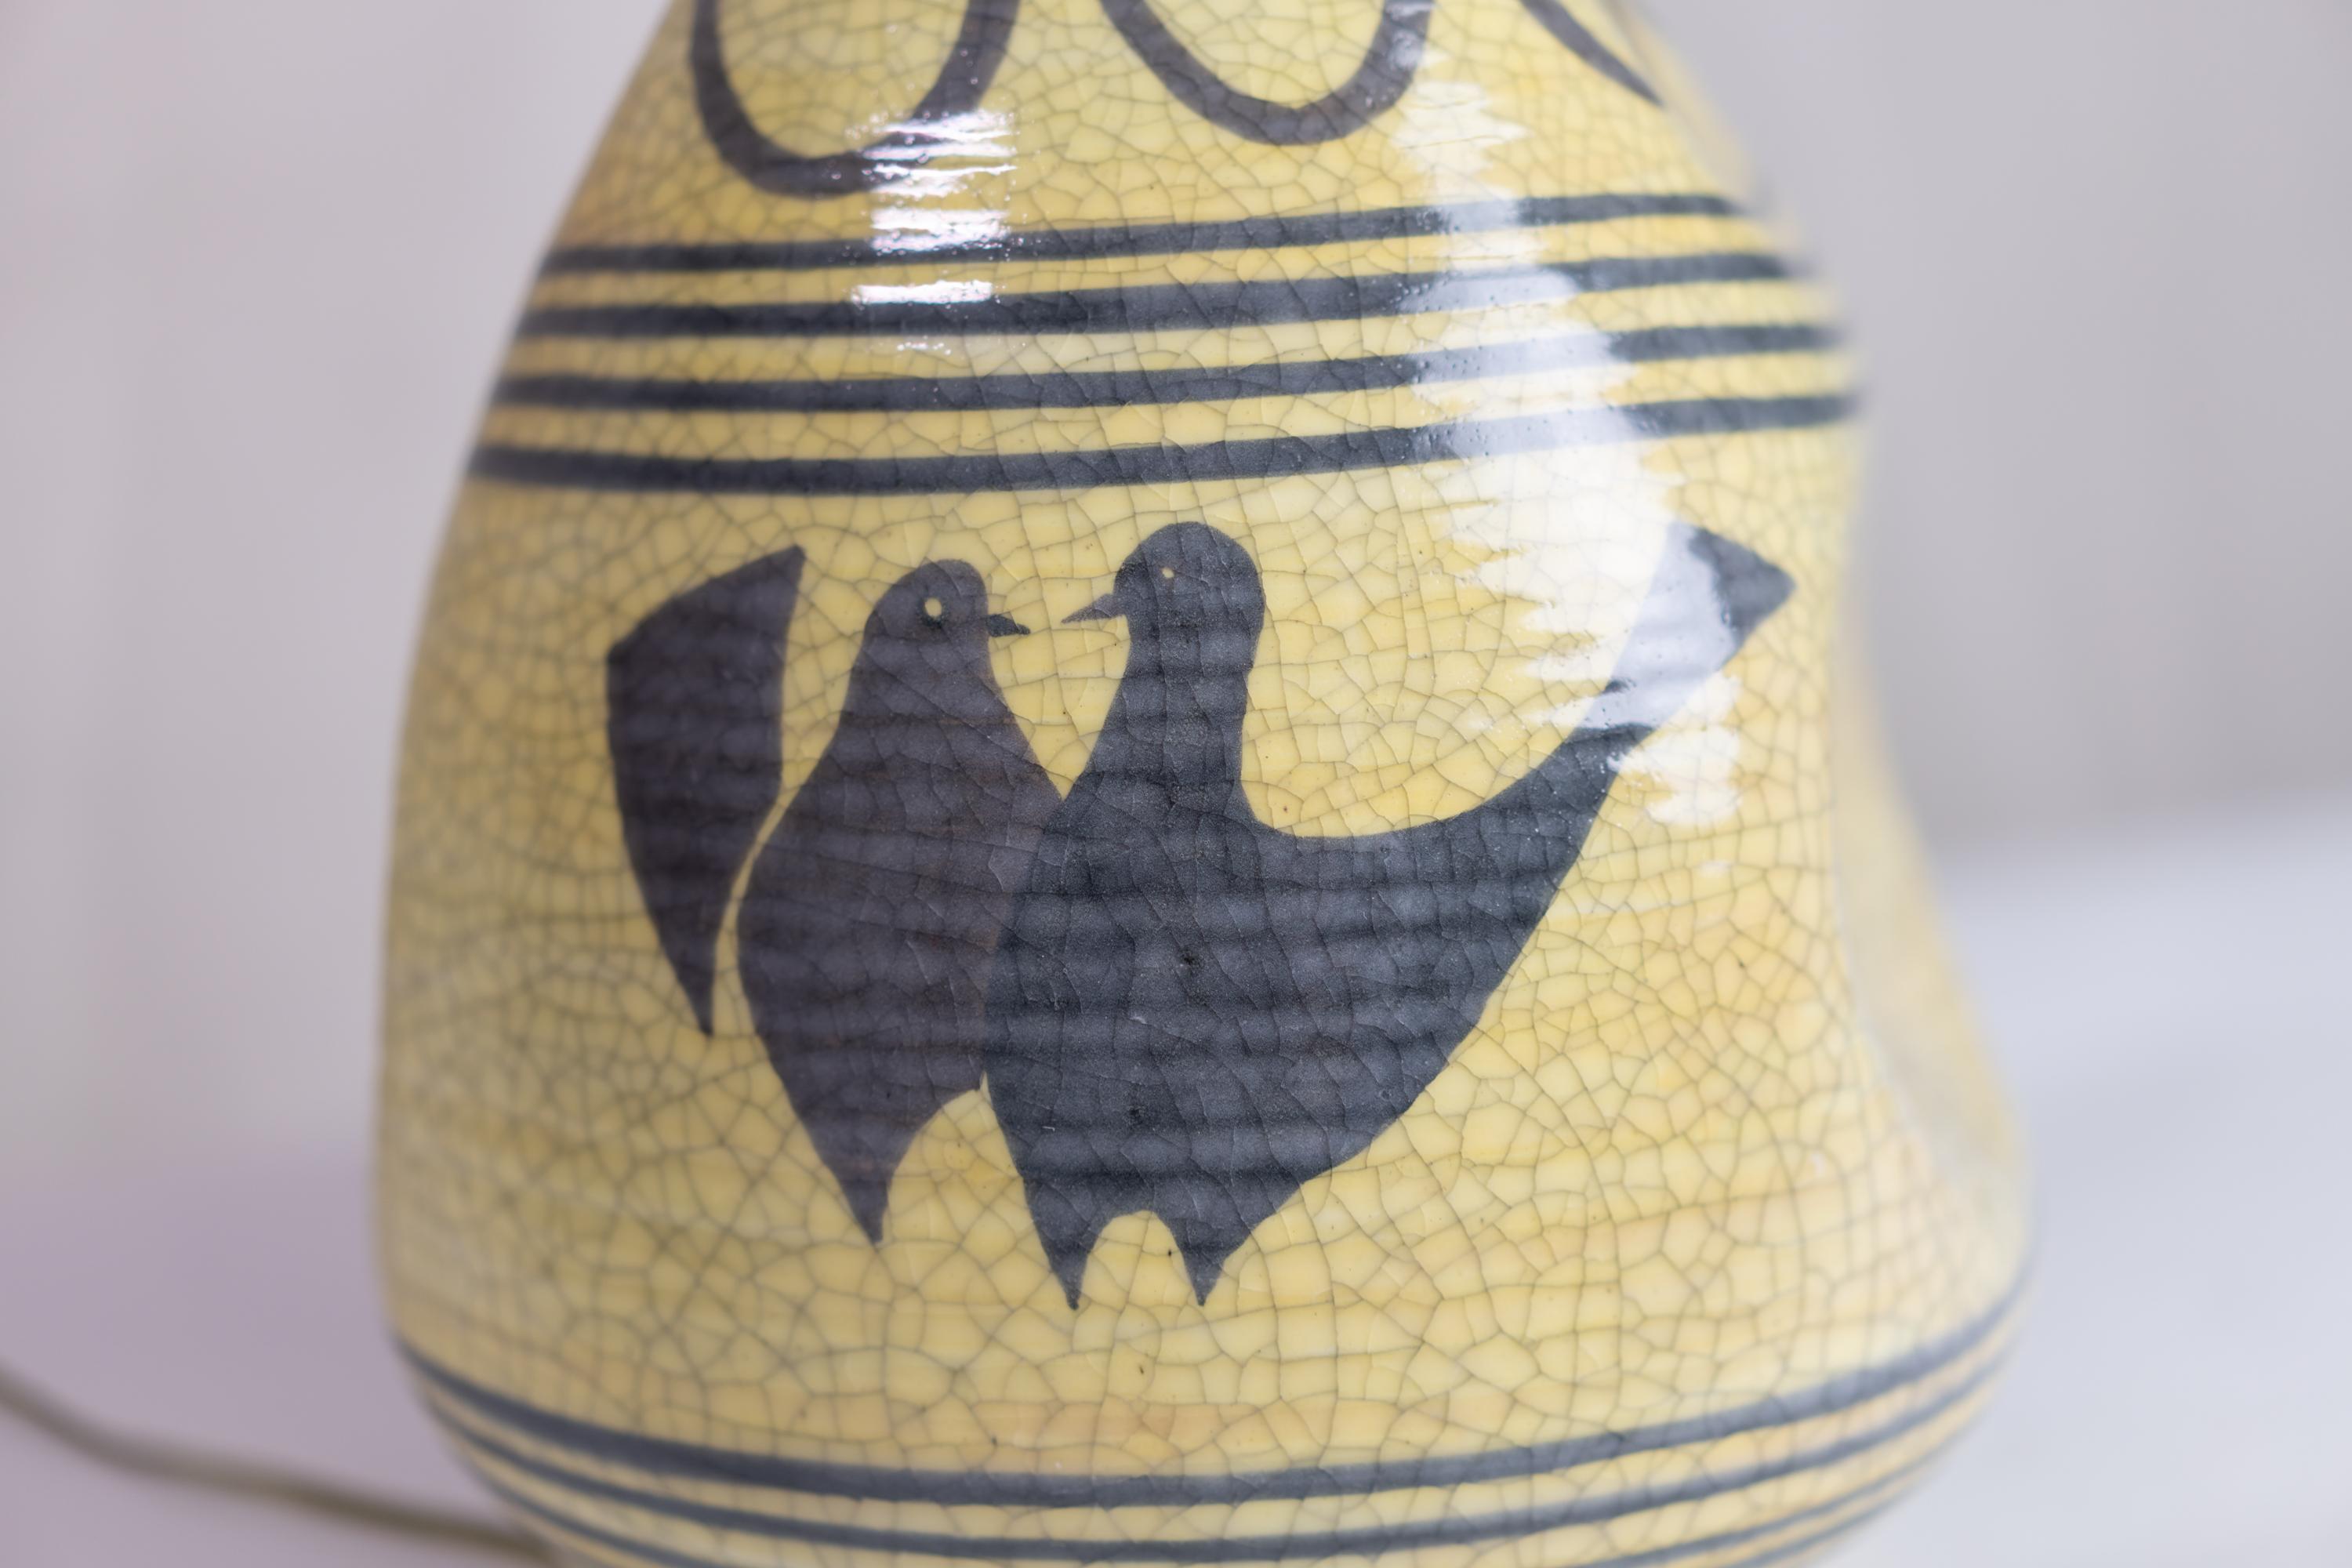 Yellow and grey Italian ceramic table lamp by Ernestine of Salerno
Signed under: 